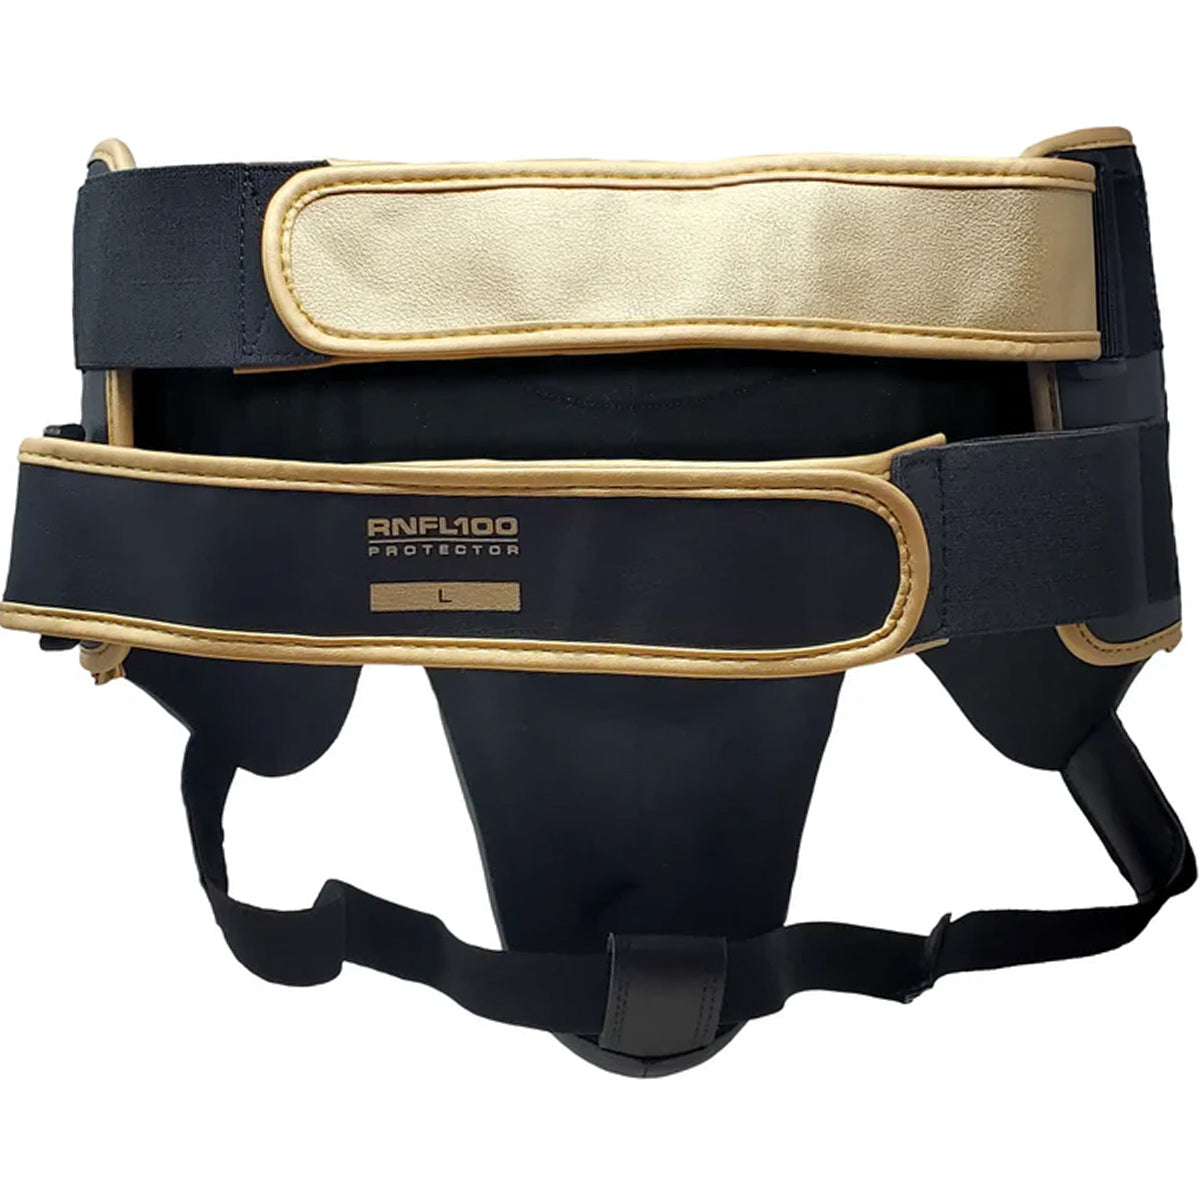 Groin Protector Rival RNFL100 Professional Black Gold